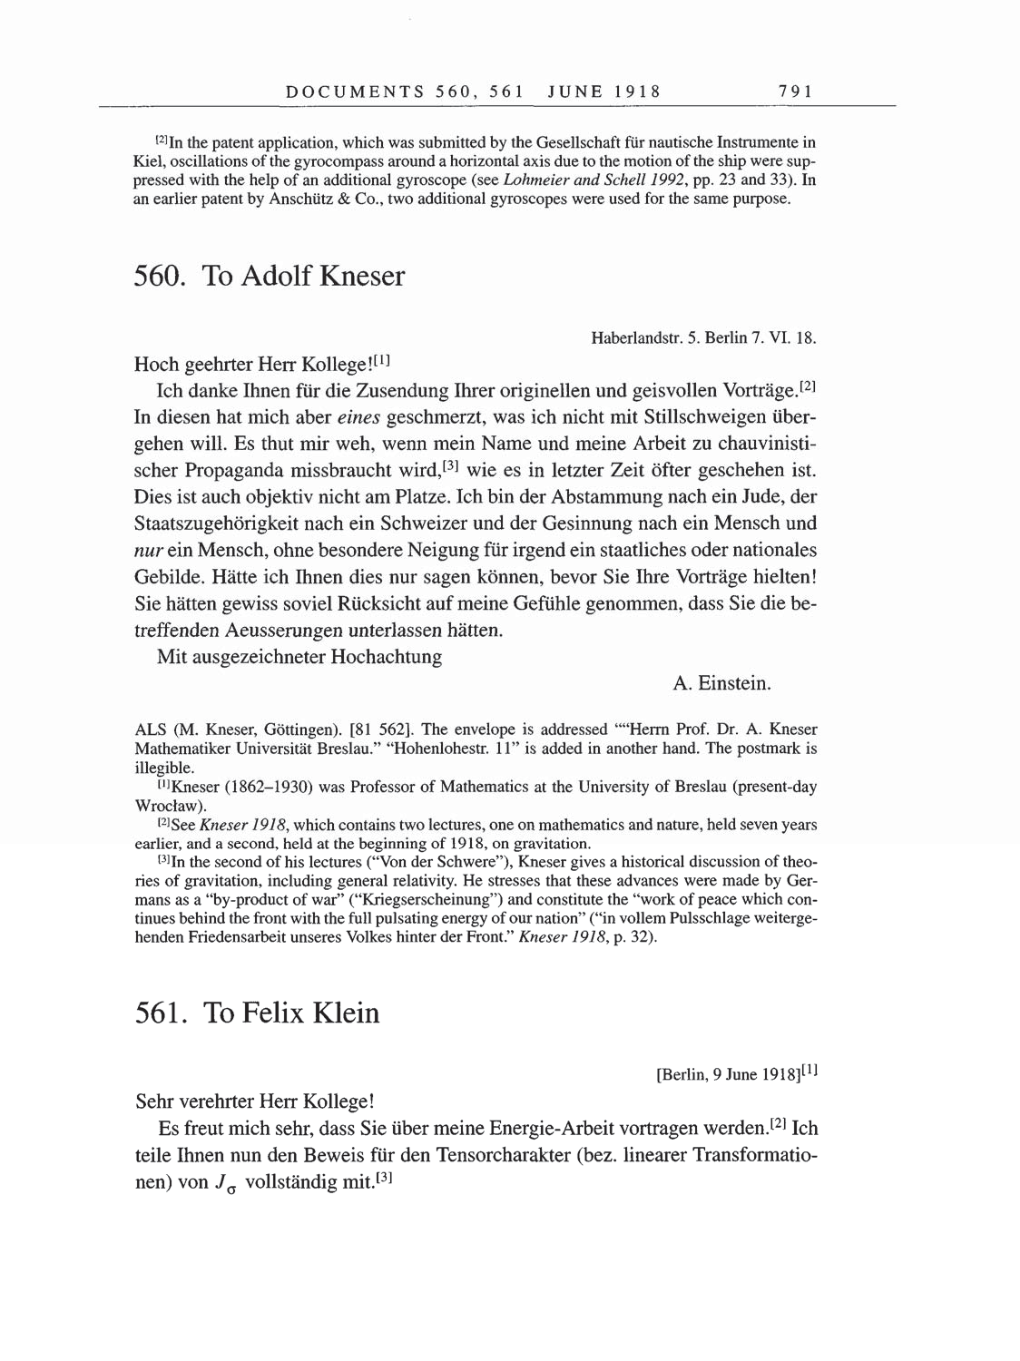 Volume 8, Part B: The Berlin Years: Correspondence 1918 page 791